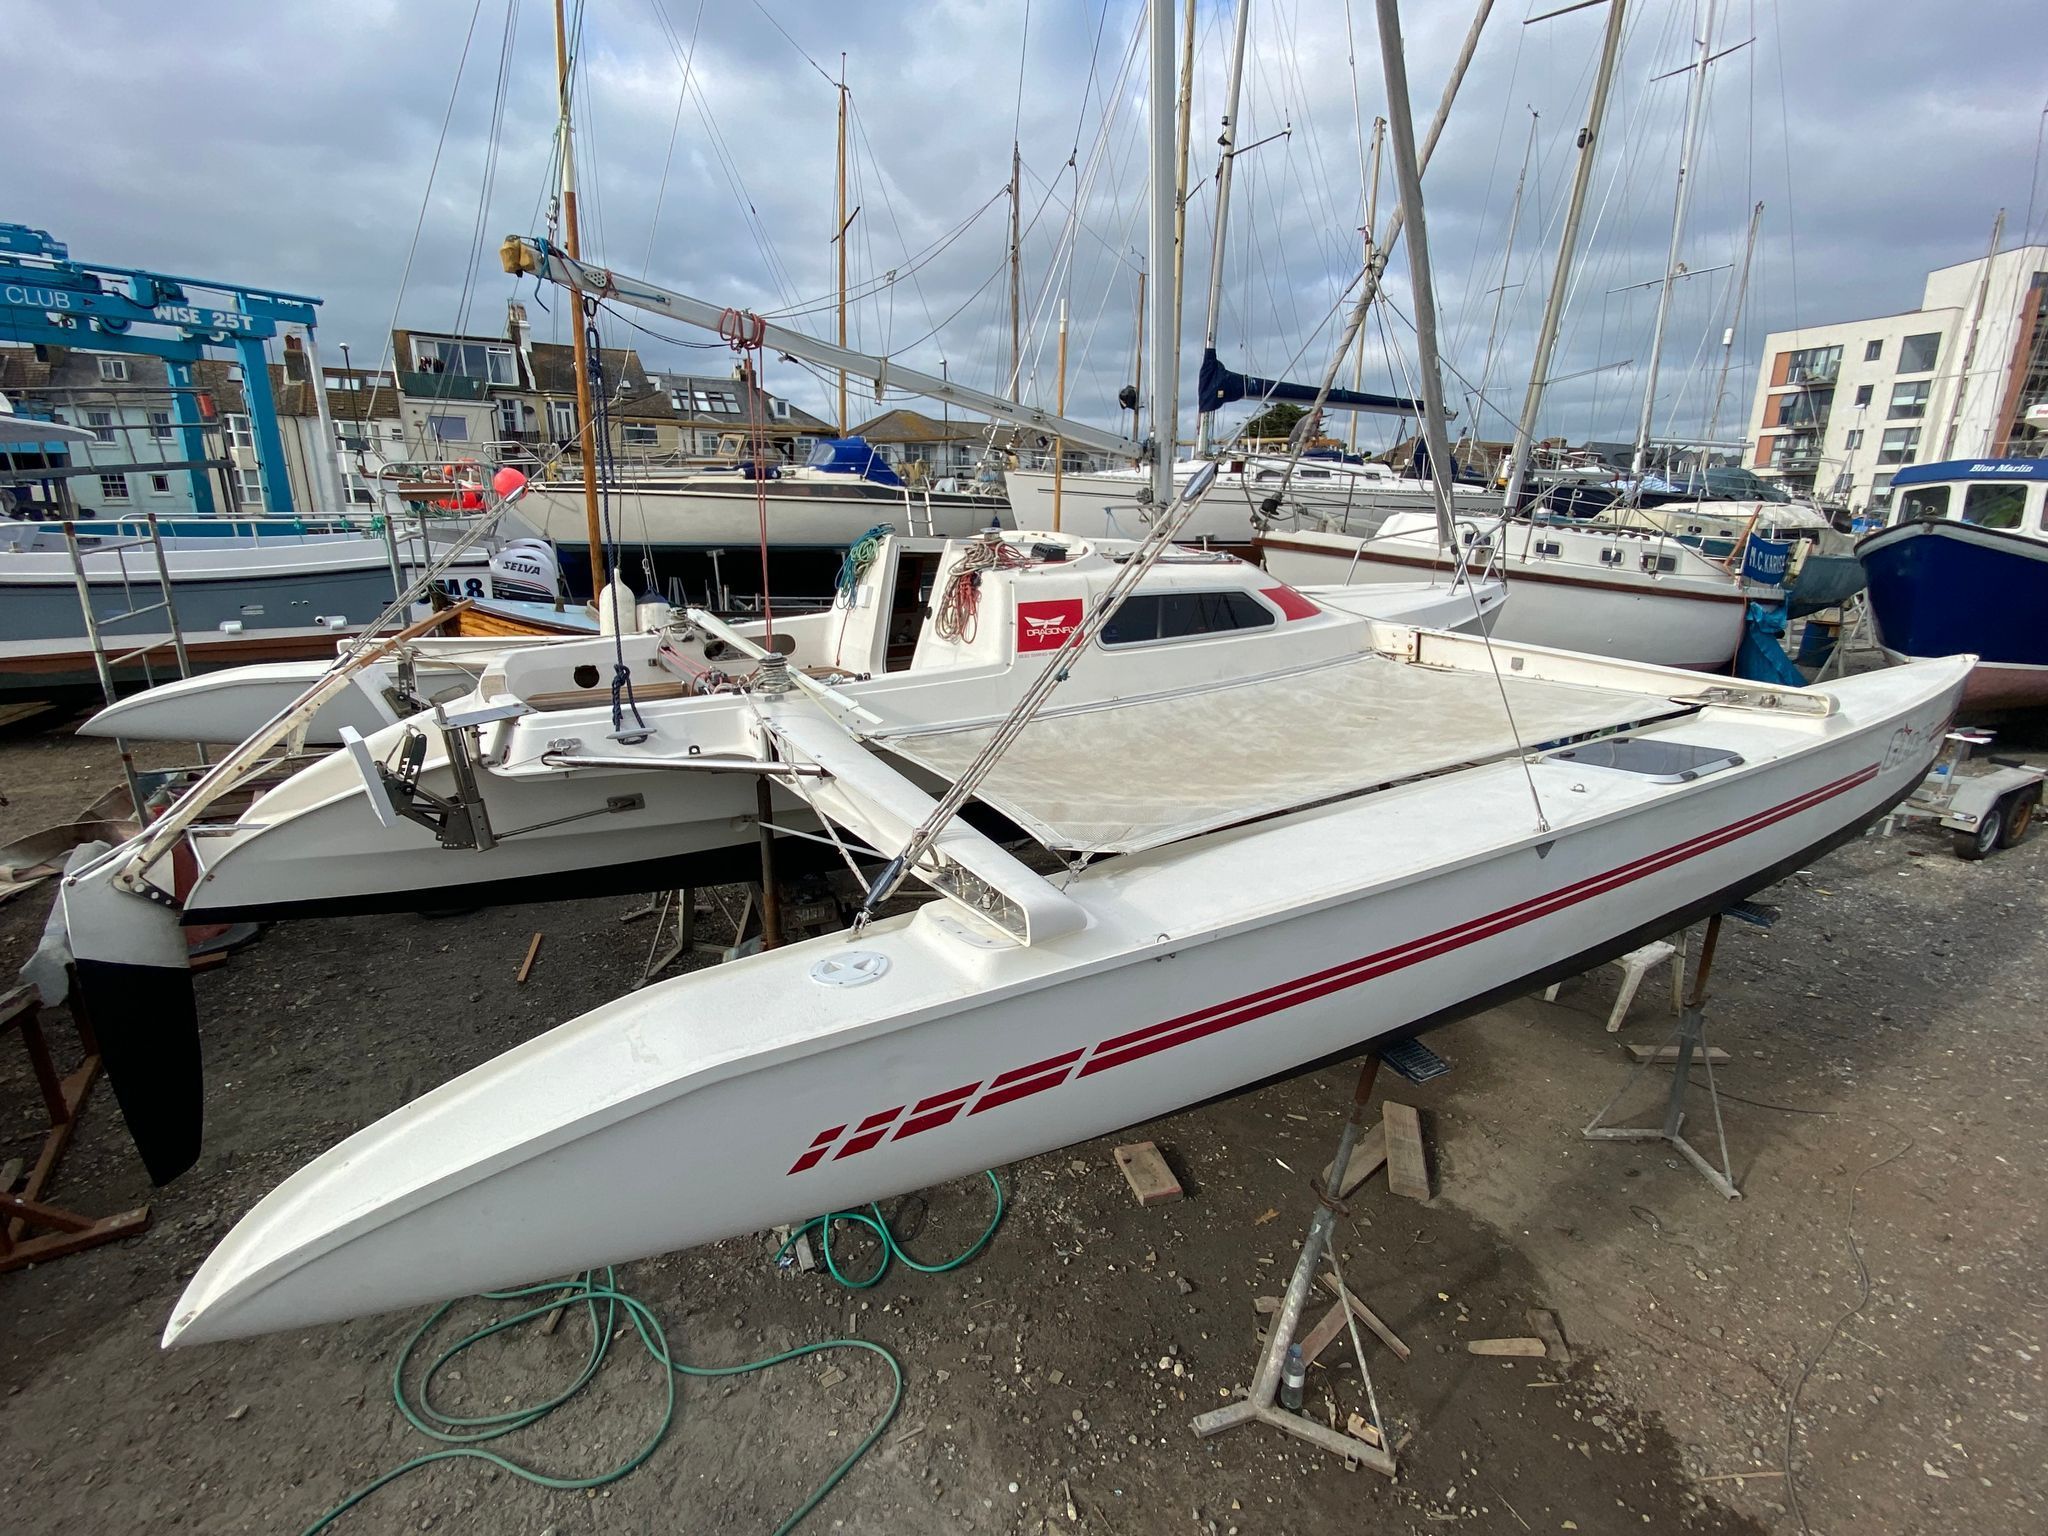 1992 Dragonfly 800 Swing Cruiser/Racer for sale - YachtWorld